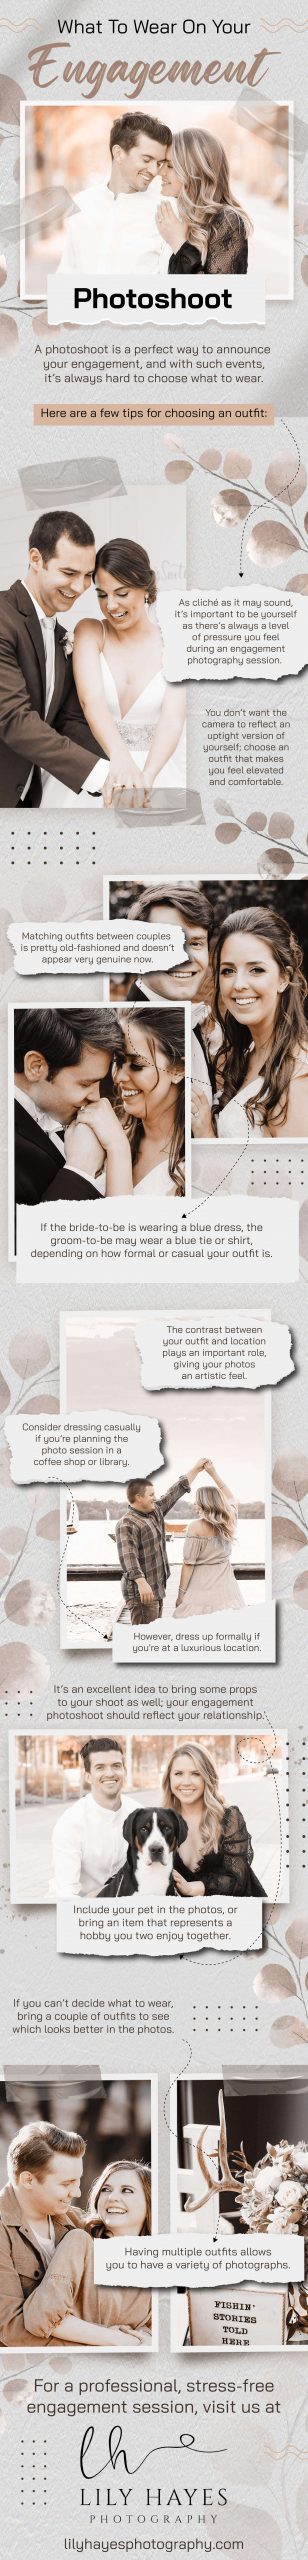 What to wear on your engagement photoshoot